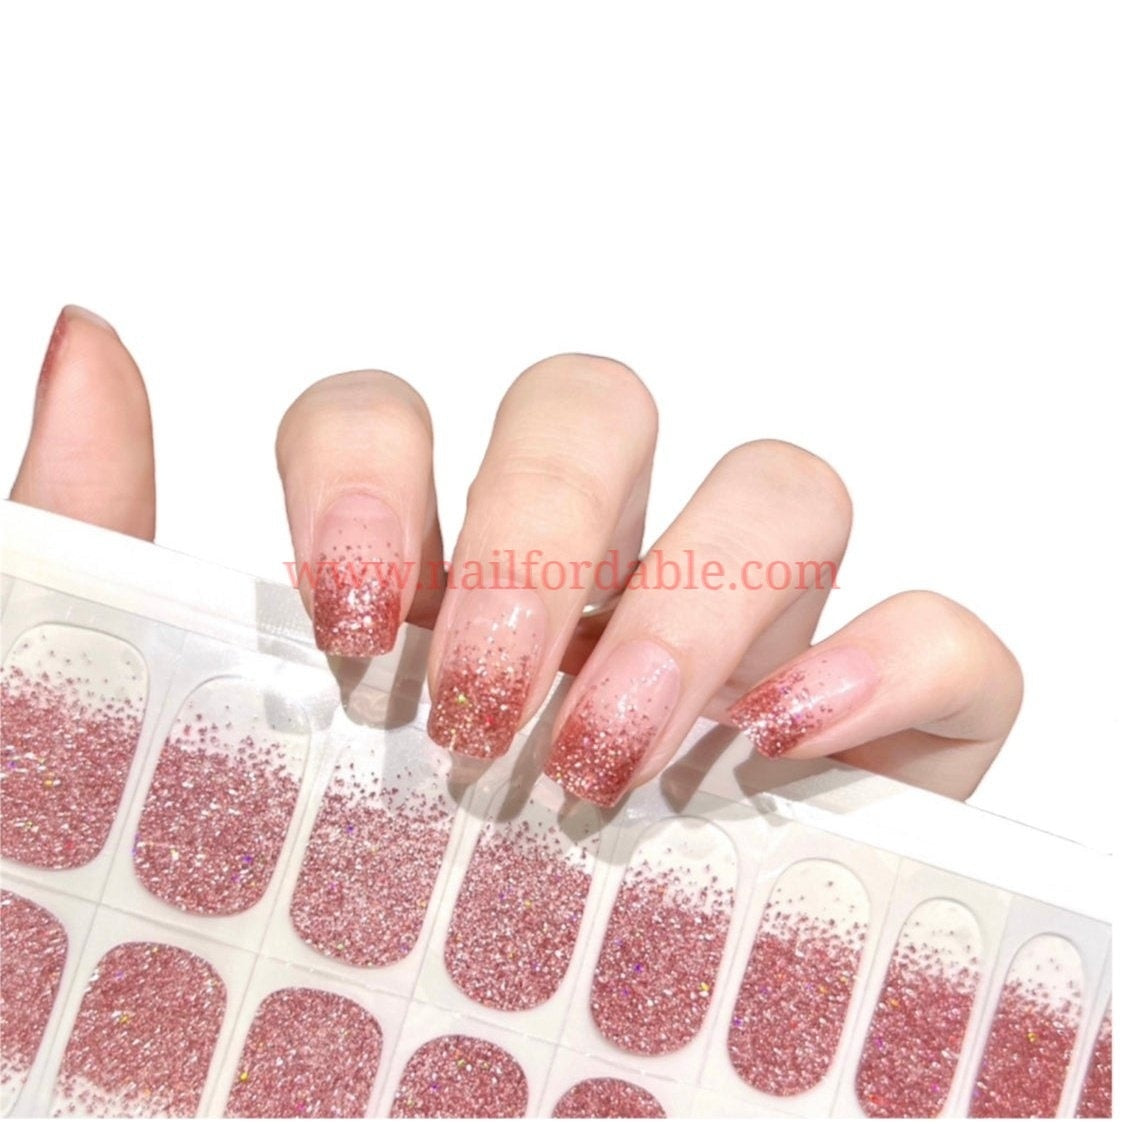 Buy Secret Lives® acrylic press on nails artifical designer fake nails  extension transparent with golden glitter design 24 pieces set with  manicure kit Online at Low Prices in India - Amazon.in